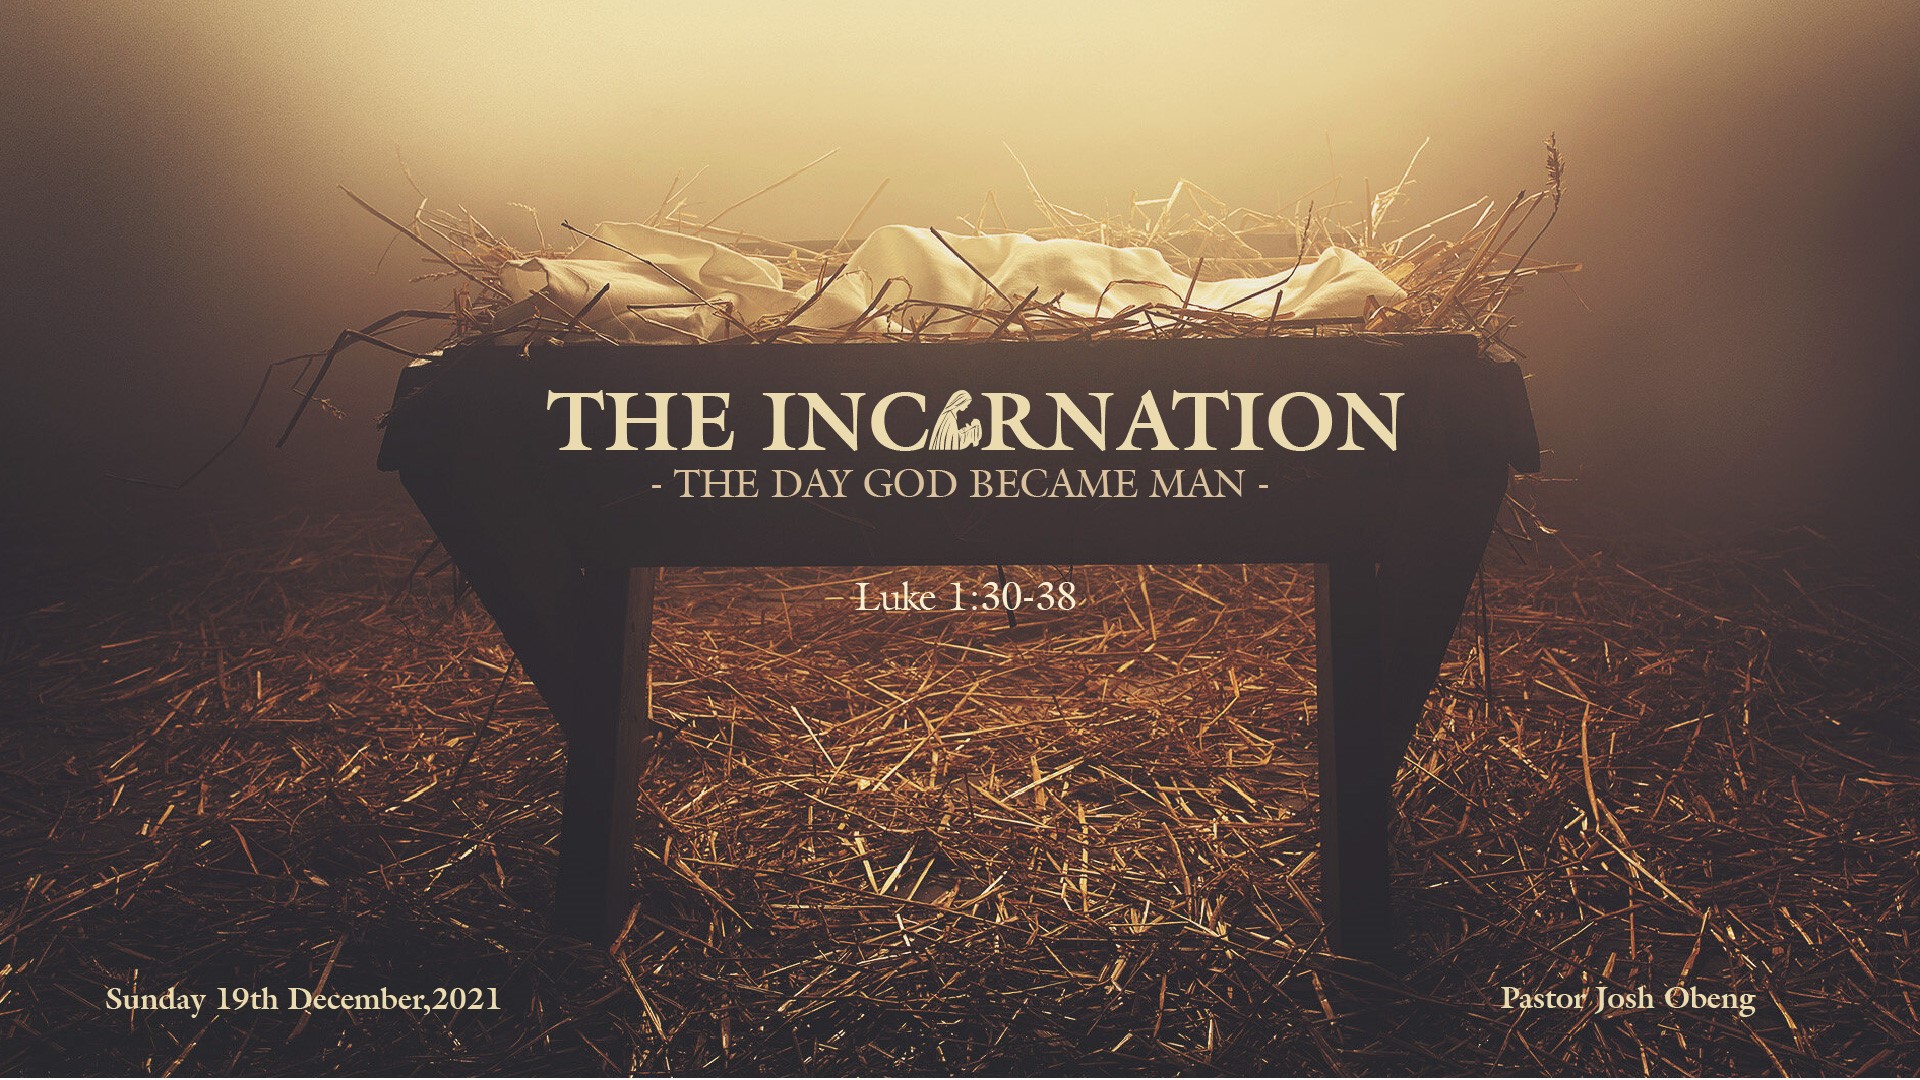 THE INCARNATION – THE DAY GOD BECAME MAN